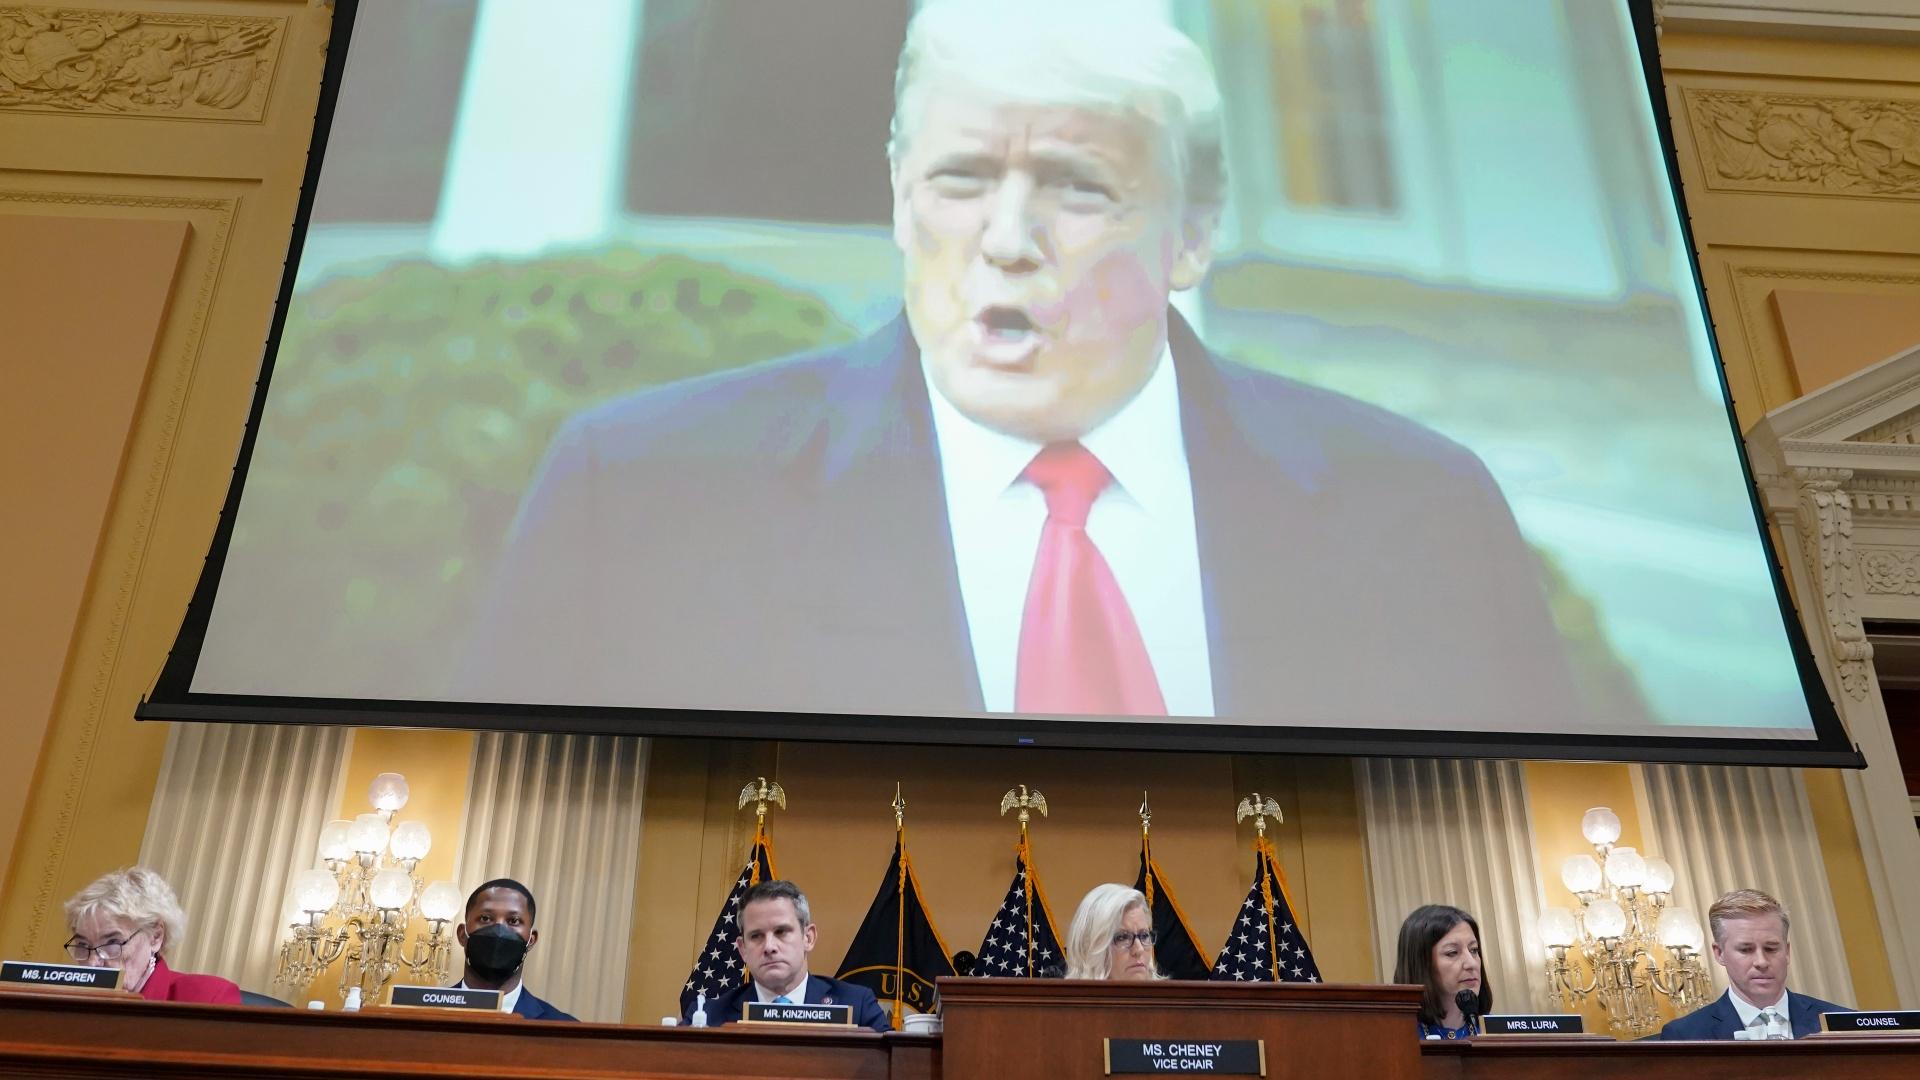 A video of former President Donald Trump speaking on Jan. 6, 2021, plays as the House select committee investigating the Jan. 6 attack on the U.S. Capitol holds a hearing at the Capitol in Washington, July 21, 2022. (AP Photo / Patrick Semansky, File)